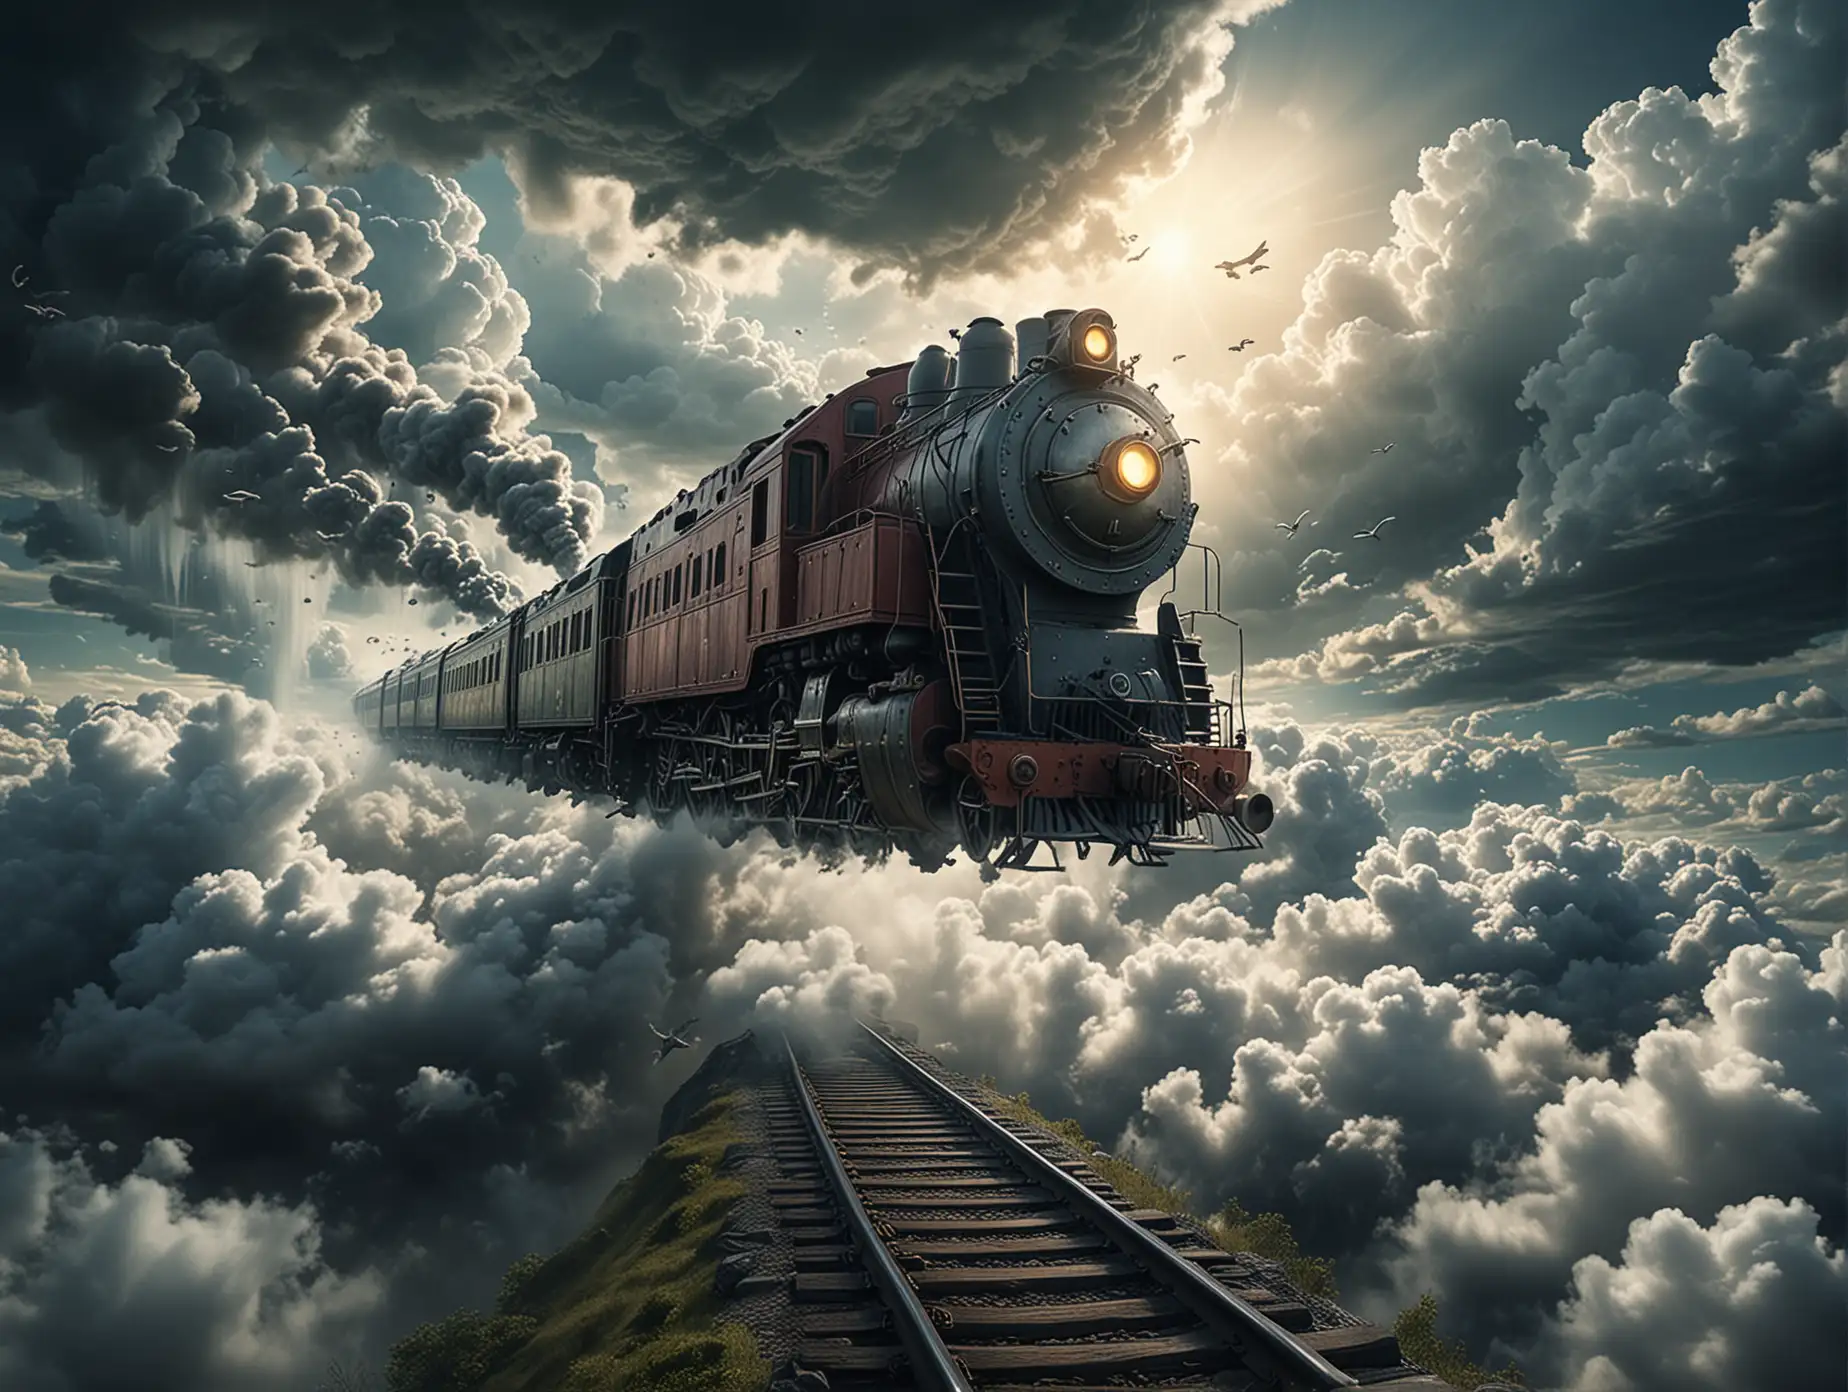 transition to a scene where the train magically transforms into a fantastical flying machine, soaring through the clouds and into uncharted territories, symbolizing the boundless possibilities of imagination